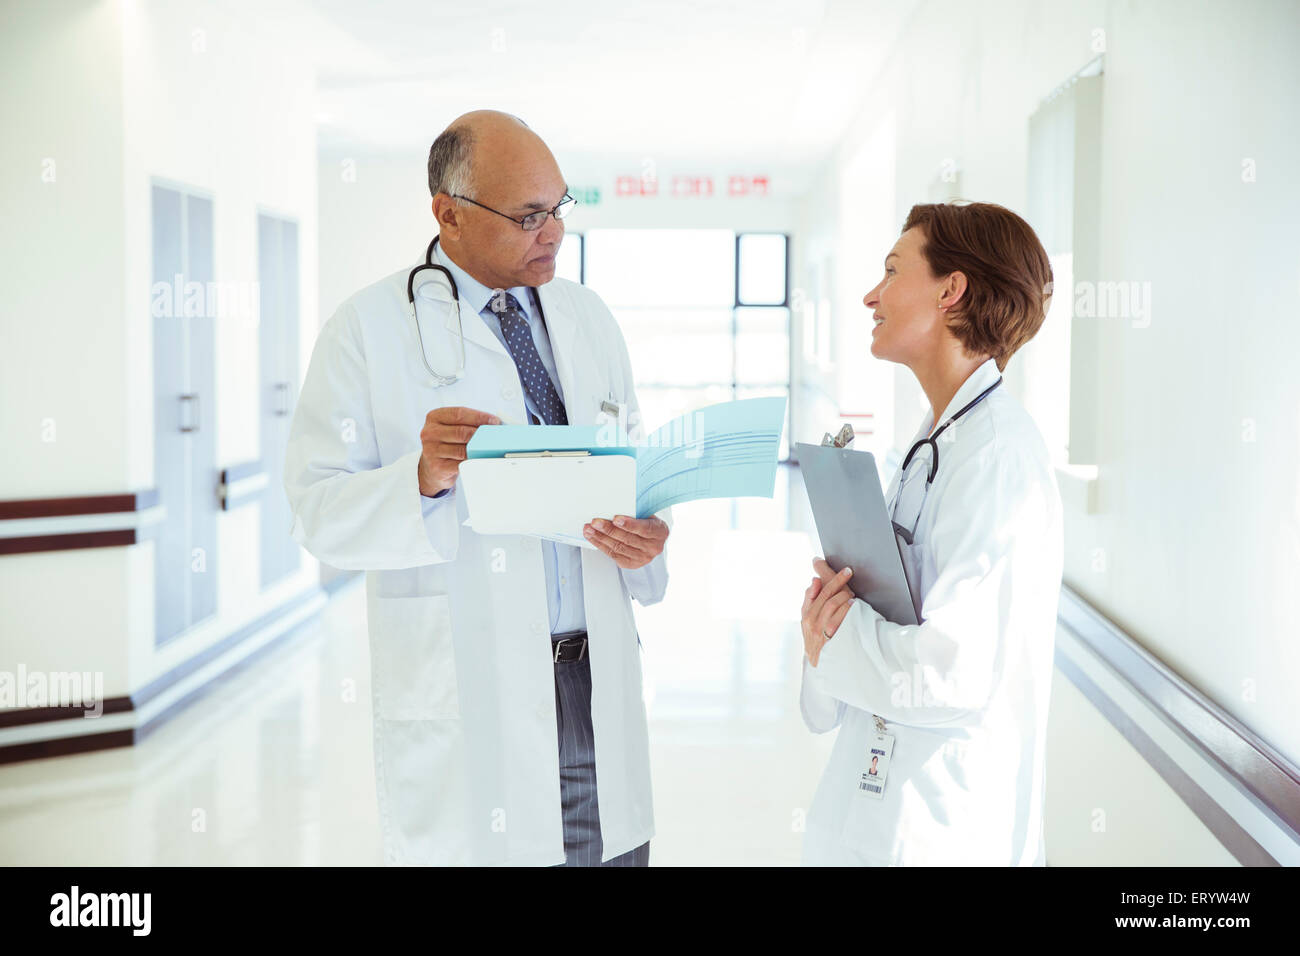 Doctors discussing medical record in hospital corridor Stock Photo